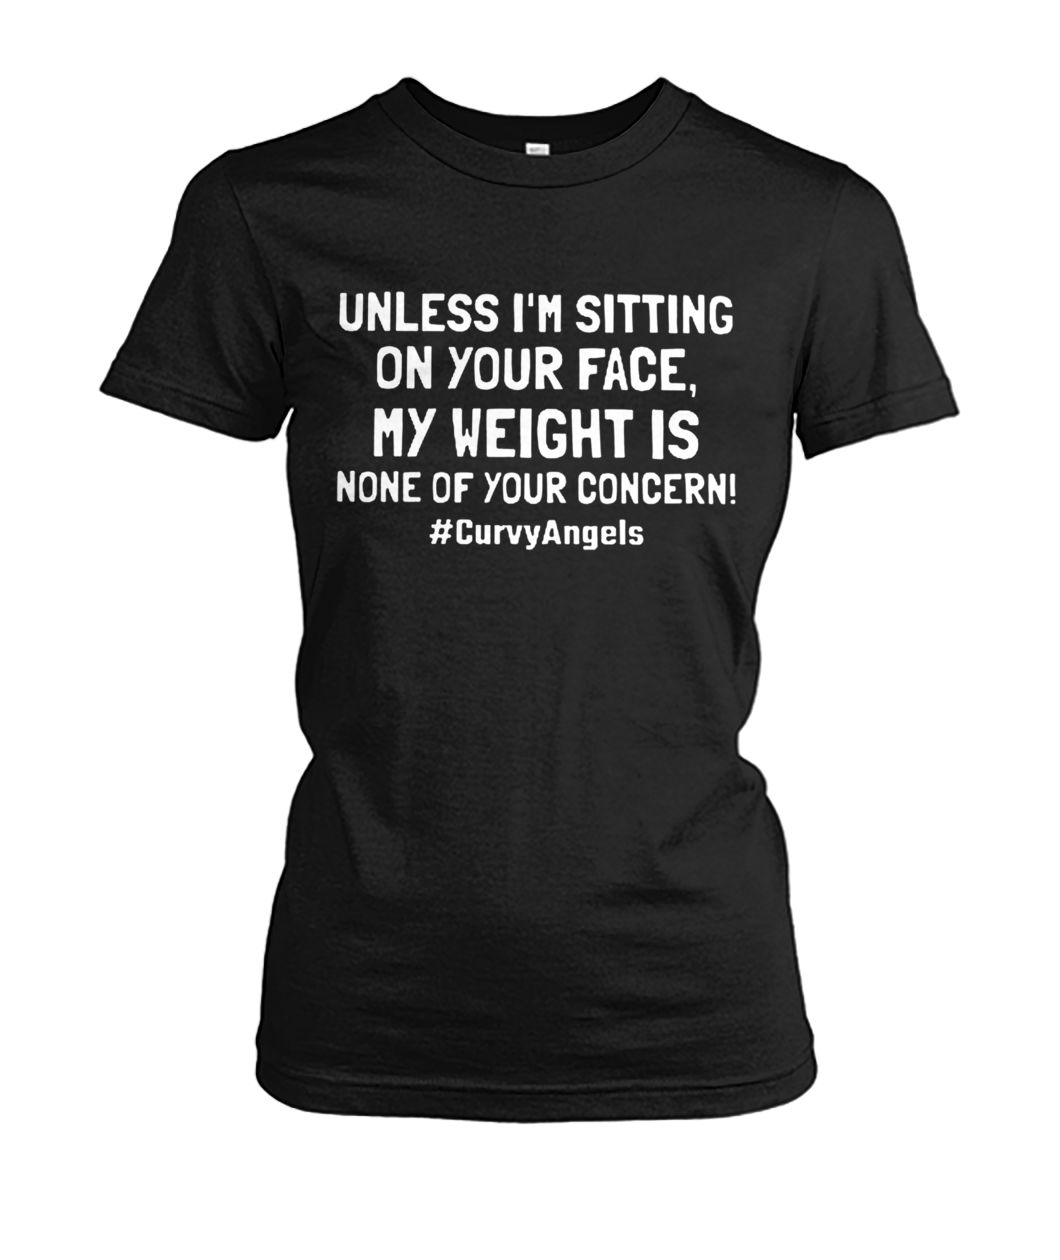 Unless I'm sitting on your face my weight is none of your concern women's crew tee